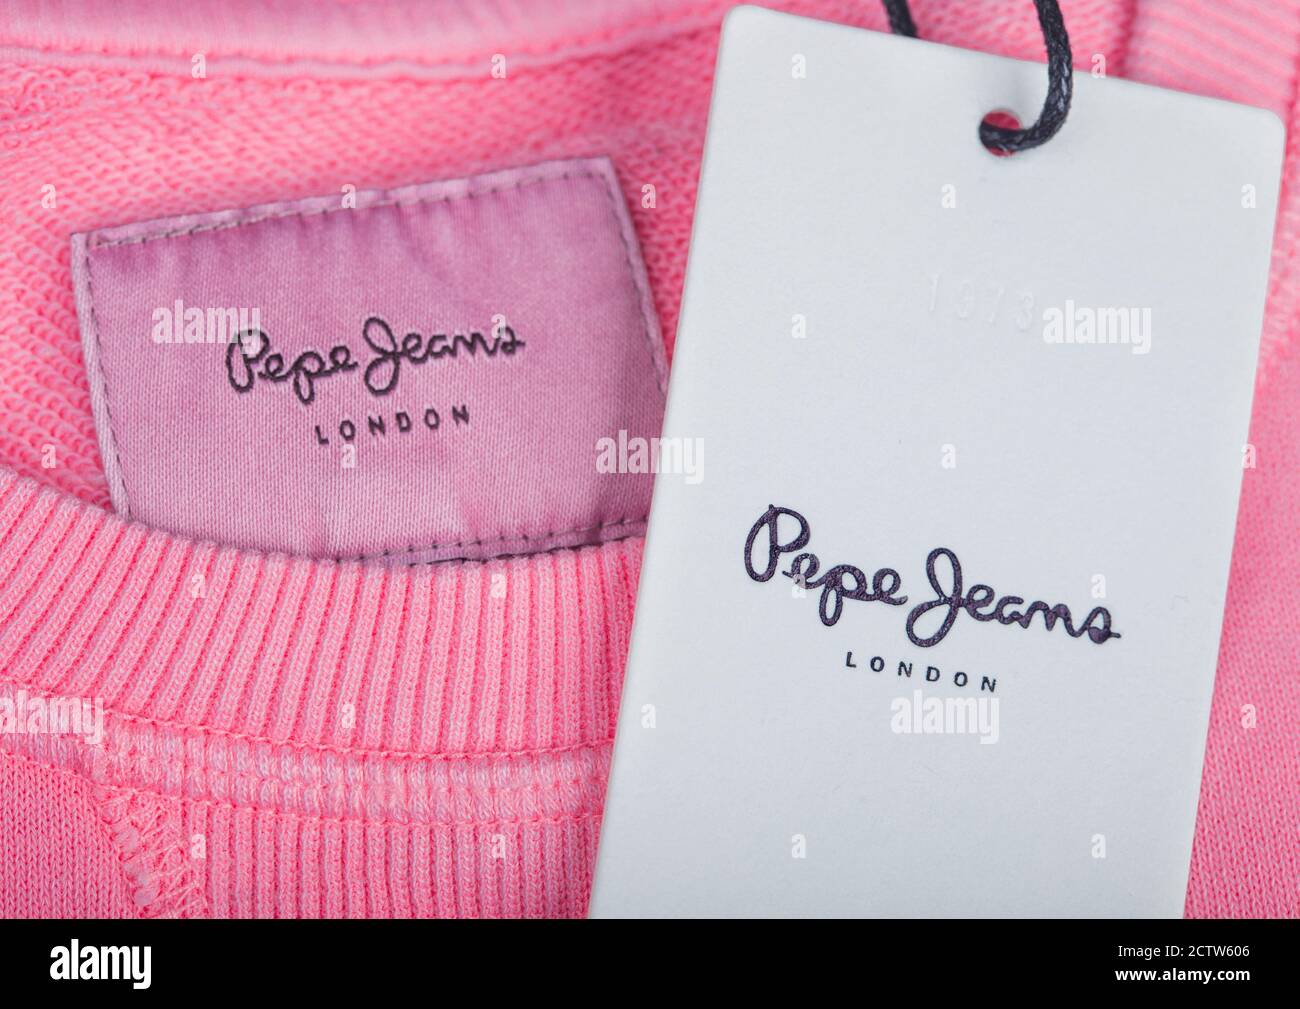 LONDON, UK - SEPTEMBER 09, 2020: Pepe Jeans label and clothing tag on pink  swaetshirt Stock Photo - Alamy